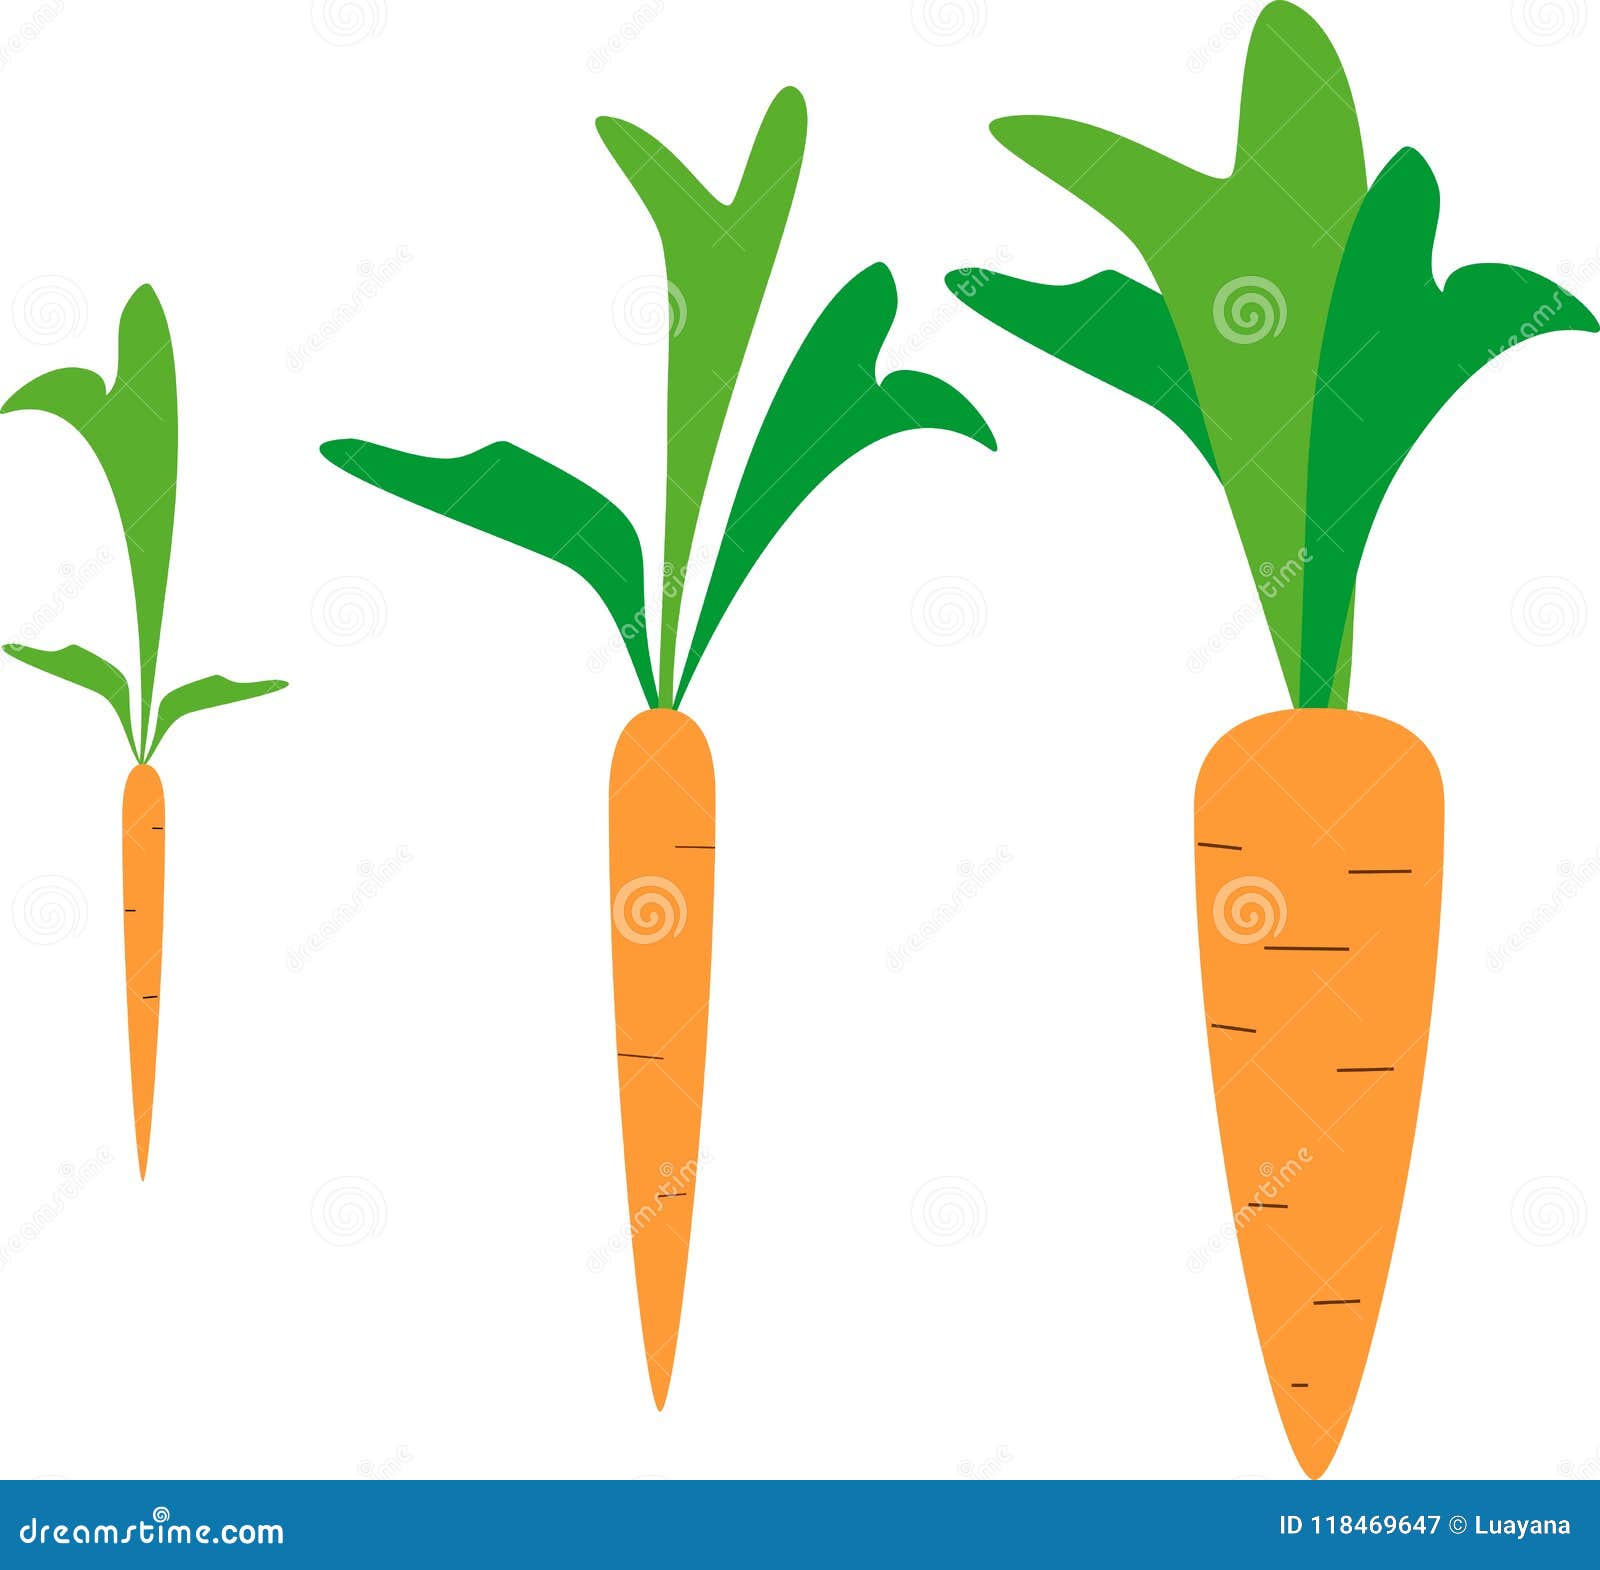 Carrot growth stages stock vector. Illustration of germinating - 118469647